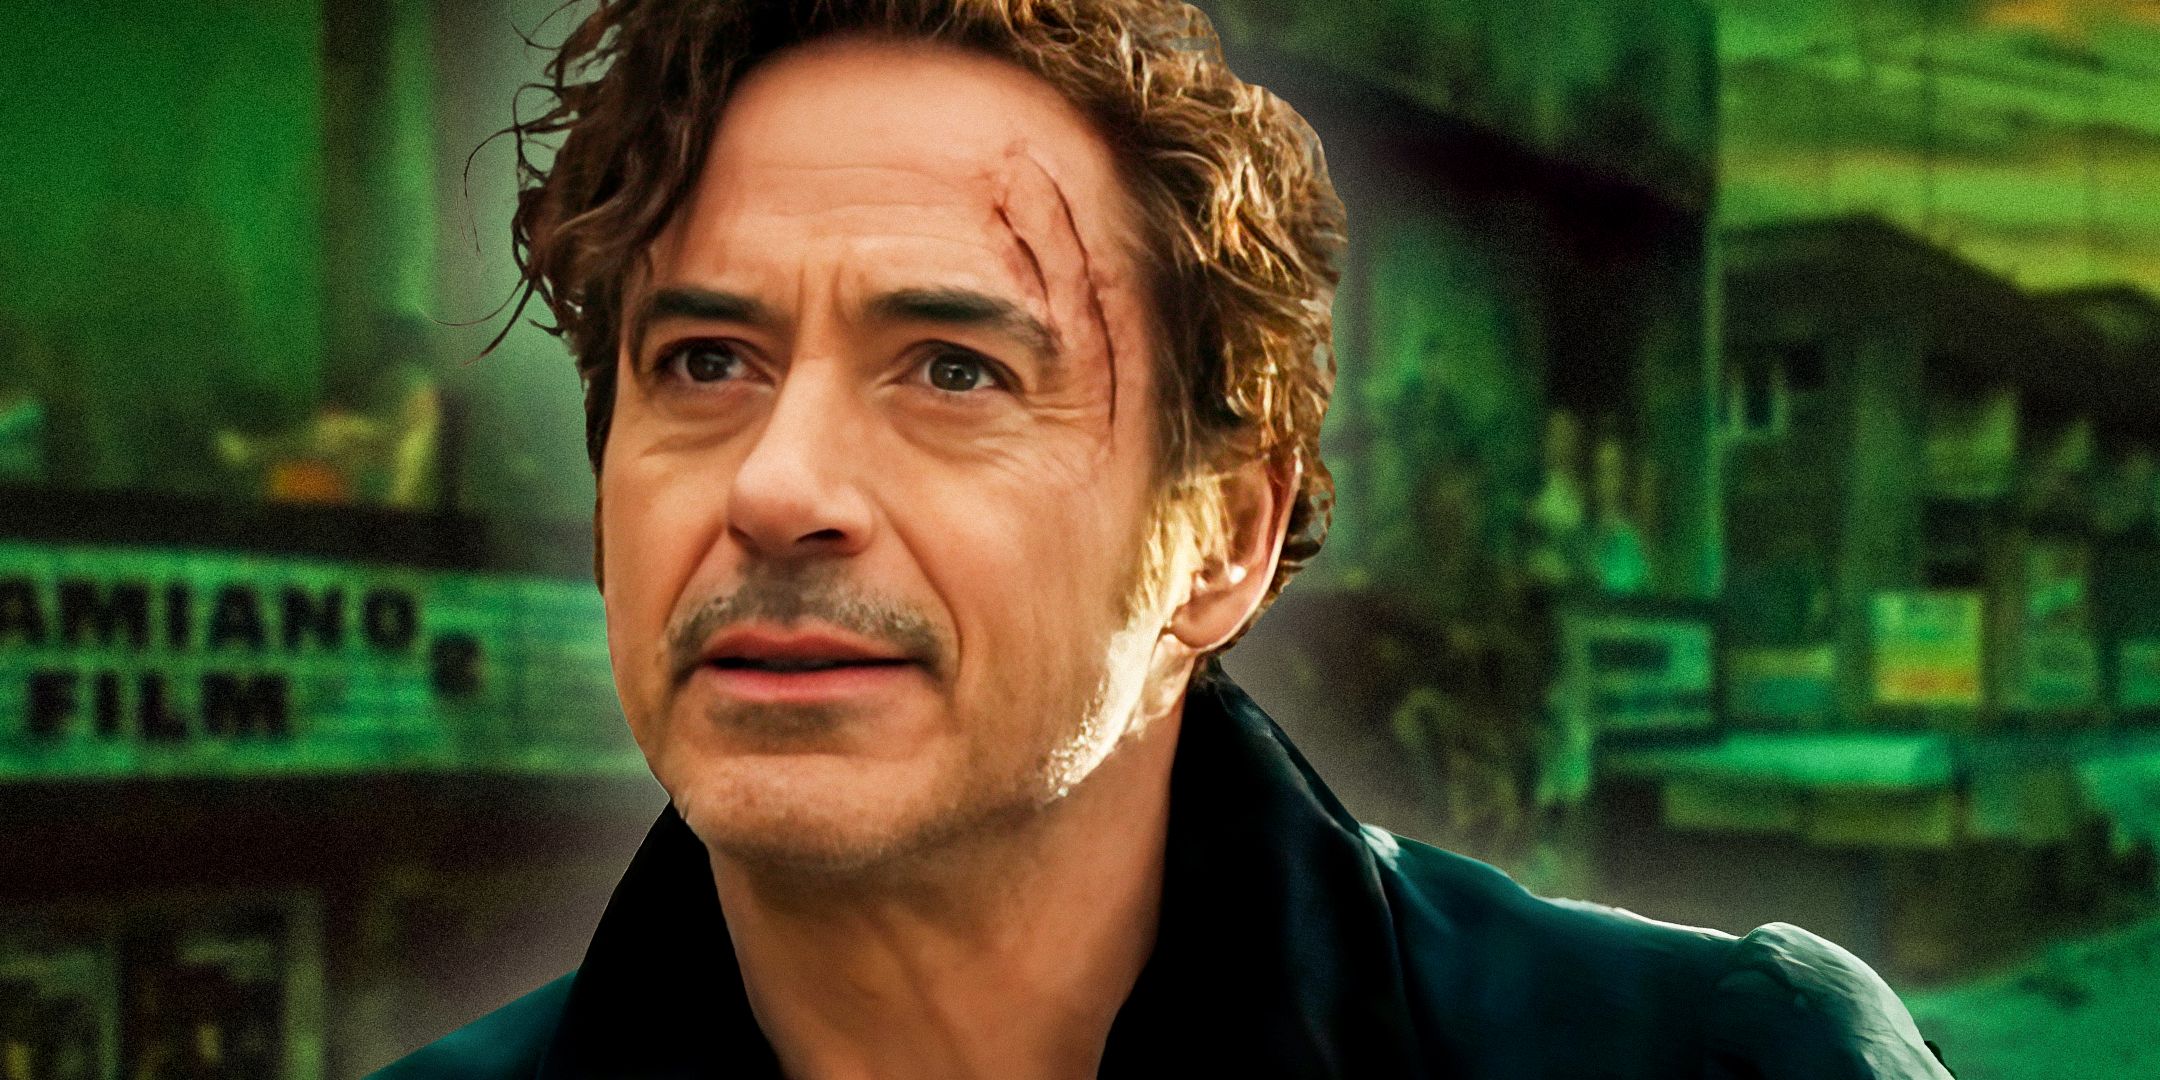 One Of Robert Downey Jr's Best Performances In Years Is Being Completely Ignored